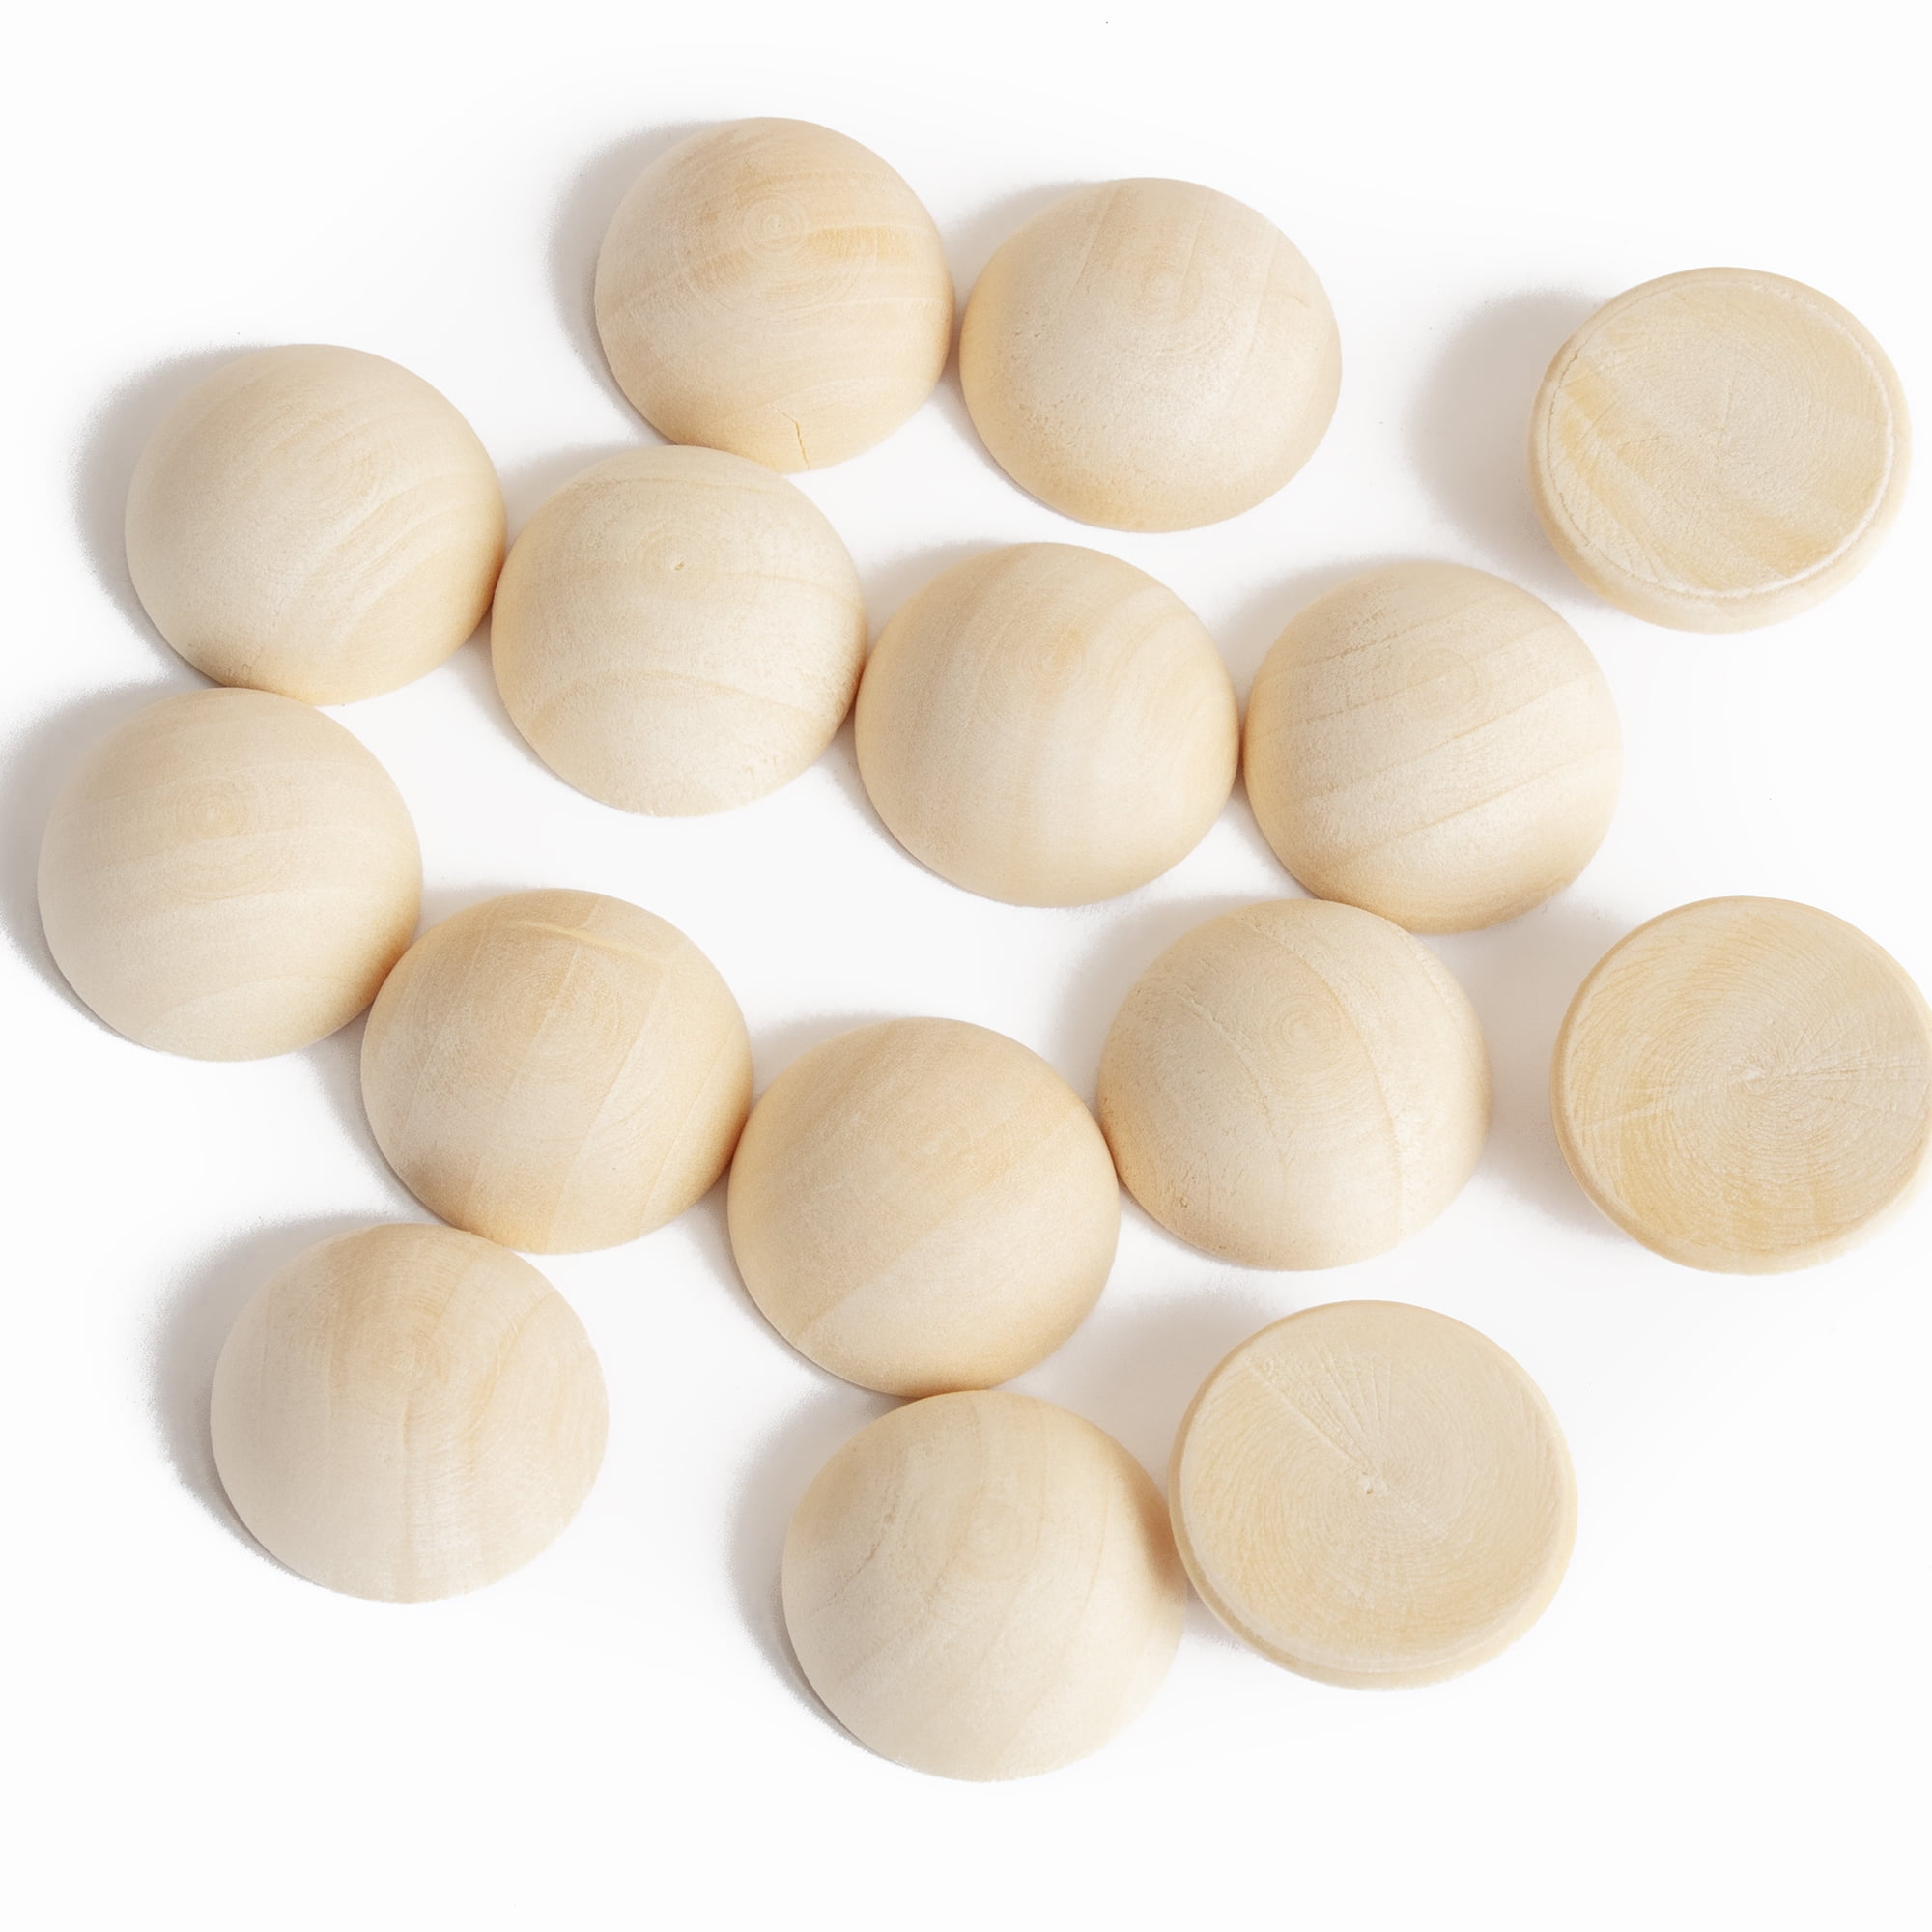  1-1/2 inch Wooden Round Balls, Bag of 5 Unfinished Wood Round  Balls, Hardwood Birch Sphere Orbs for Crafts and DIY Projects, Woodworking  (1-1/2 inch Diameter) by Woodpeckers